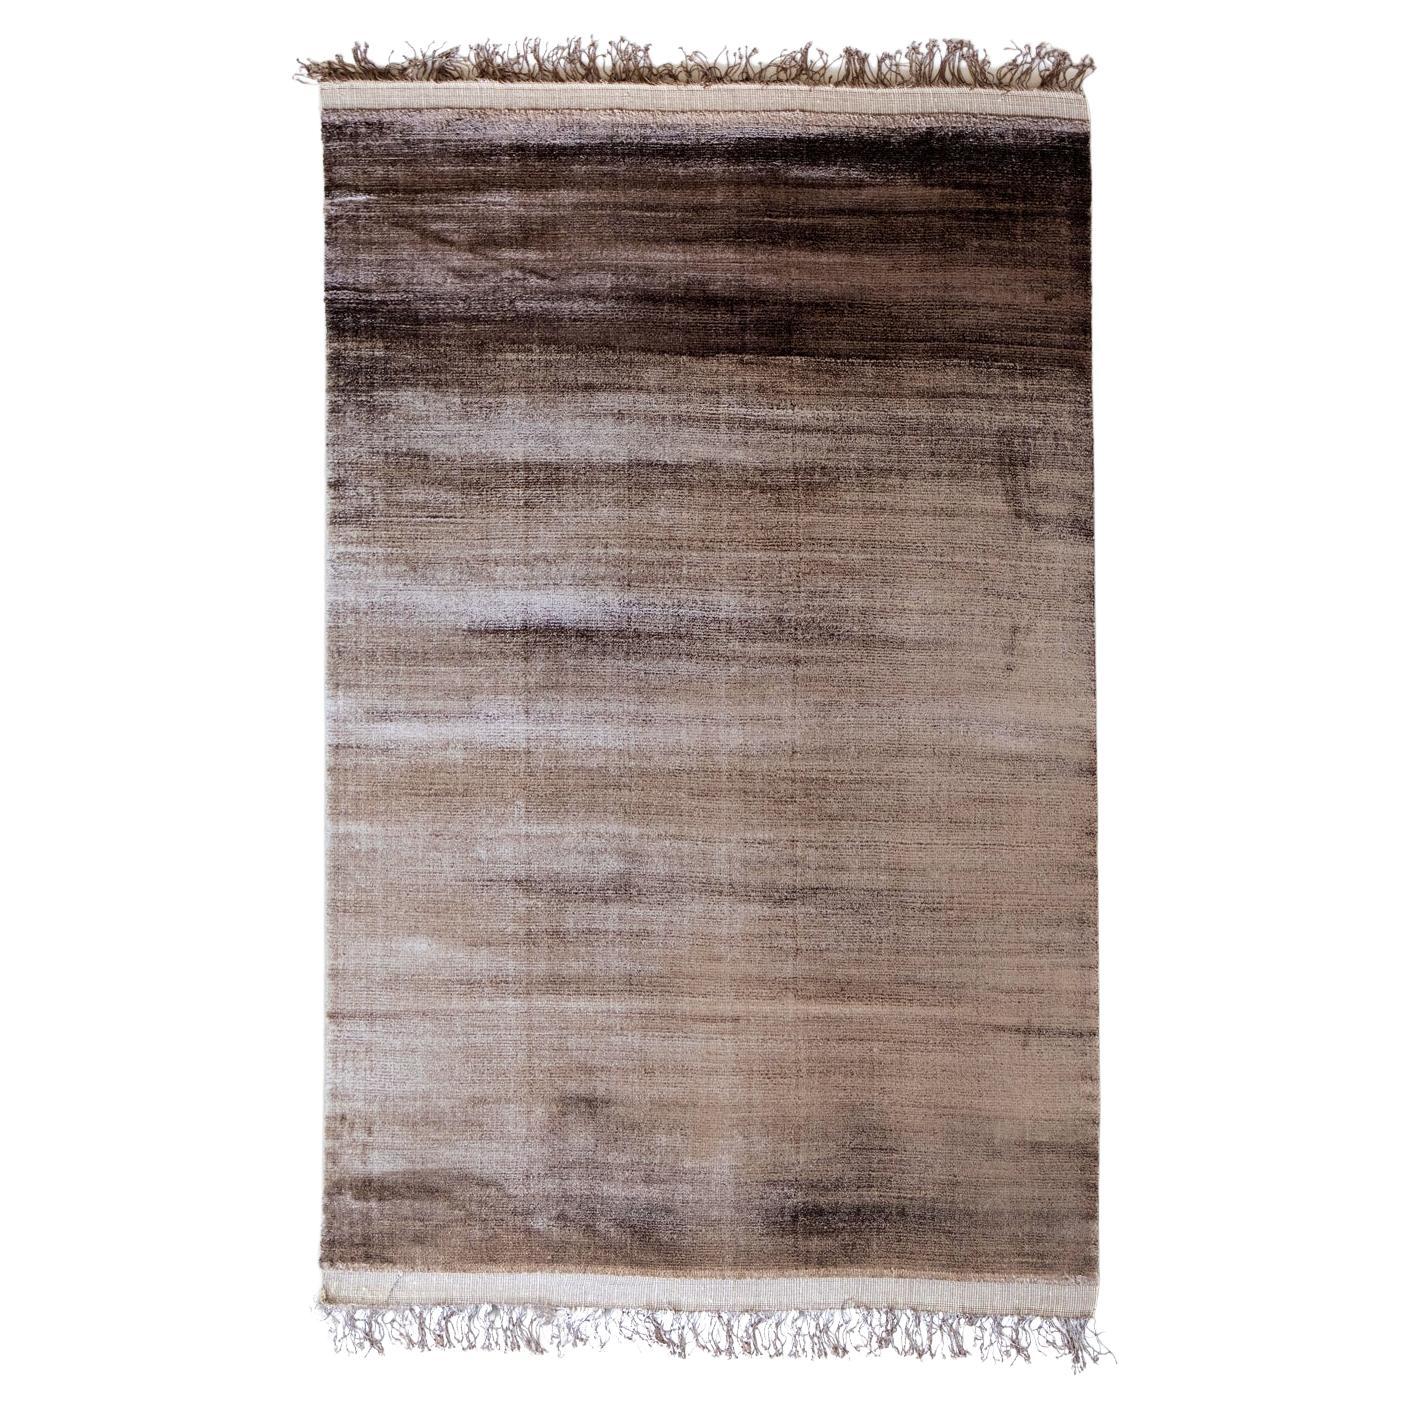 21st Cent Fringes Viscose Design Rug by Deanna Comellini In Stock 200x300 cm